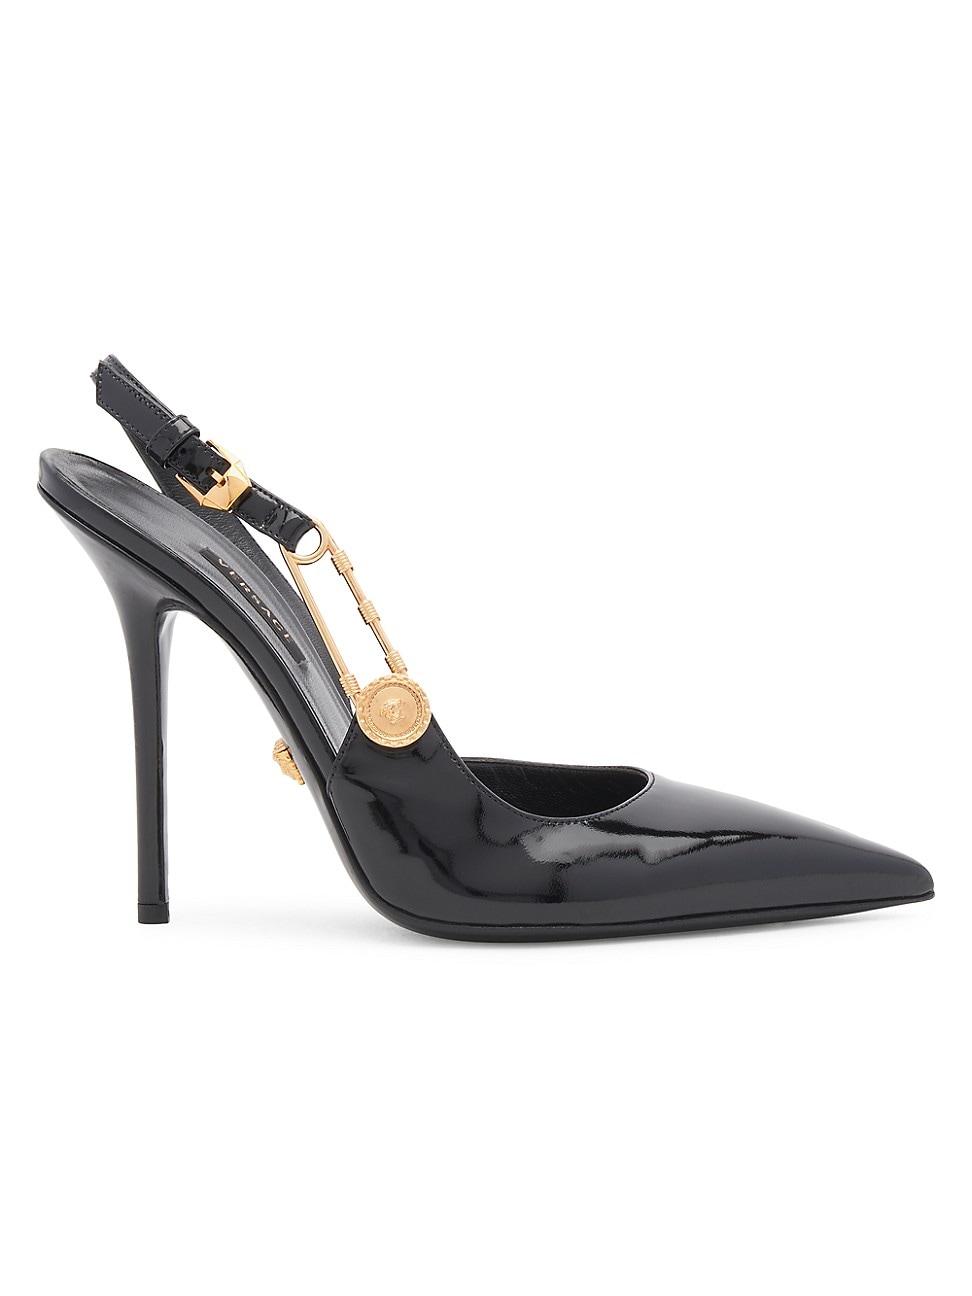 Versace Safety Pin Patent Leather Slingback Pumps in Metallic | Lyst